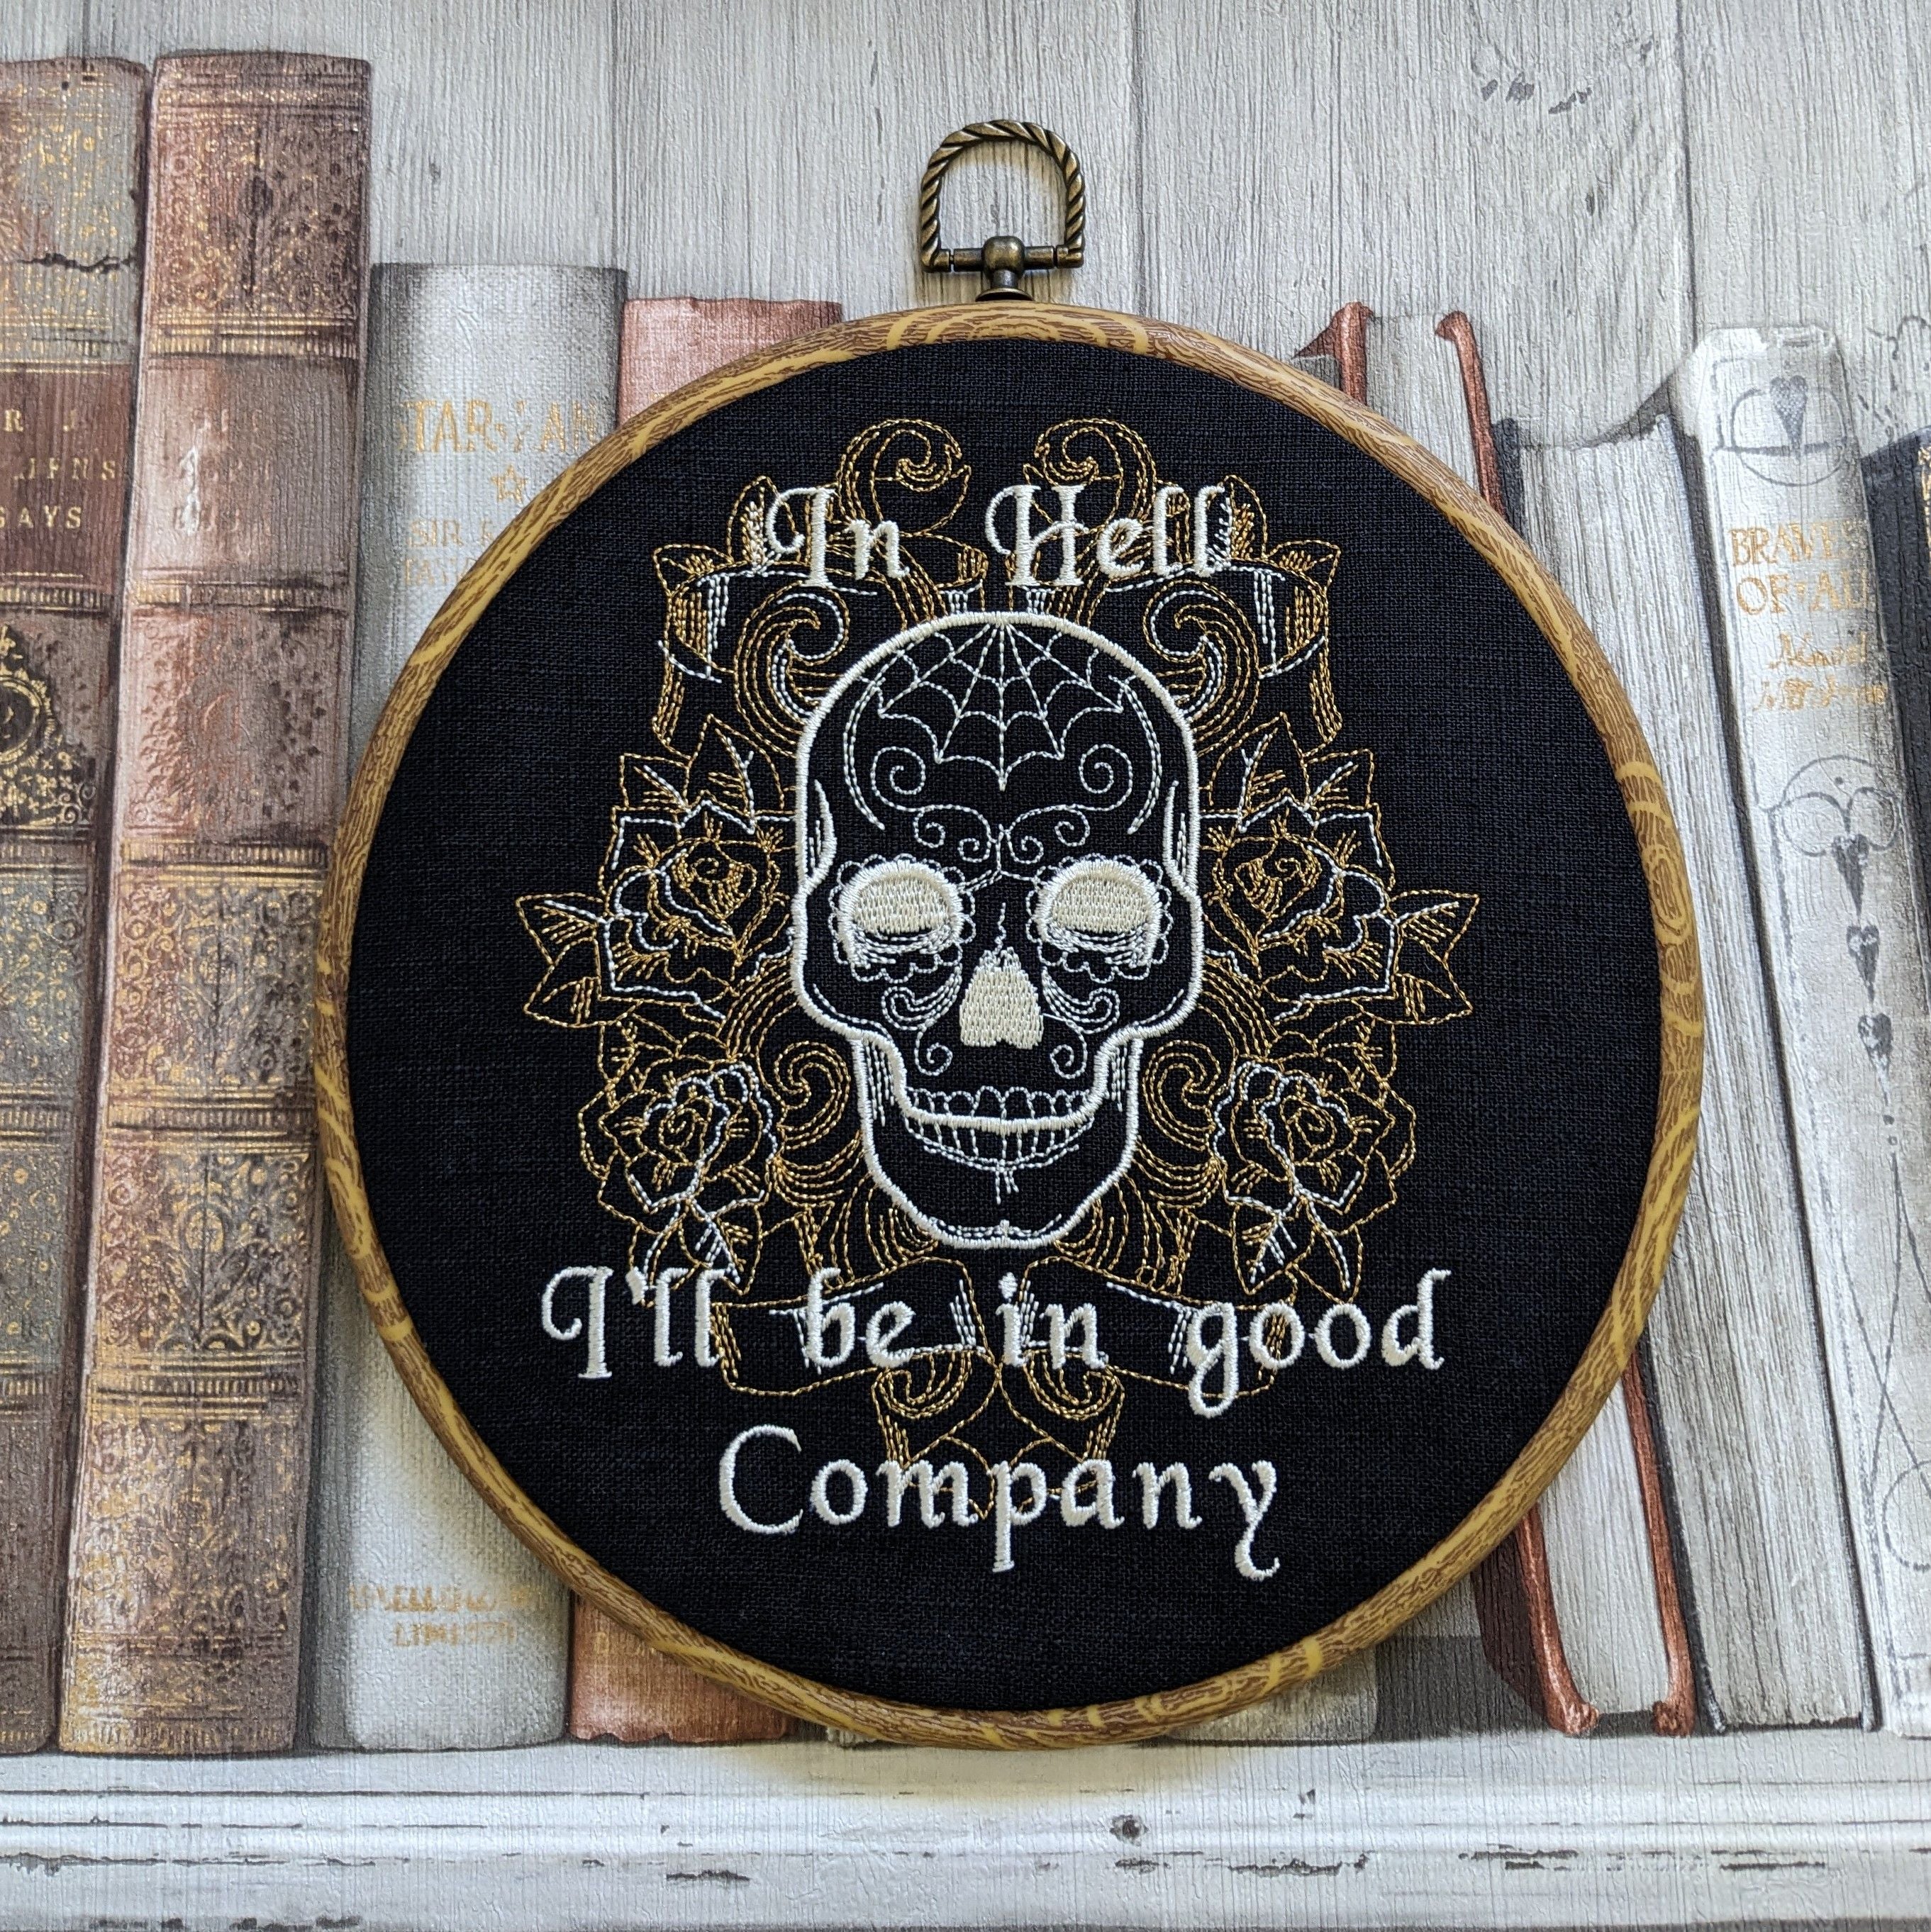 In hell I'll be in good company. Machine embroidery 8" hoop art